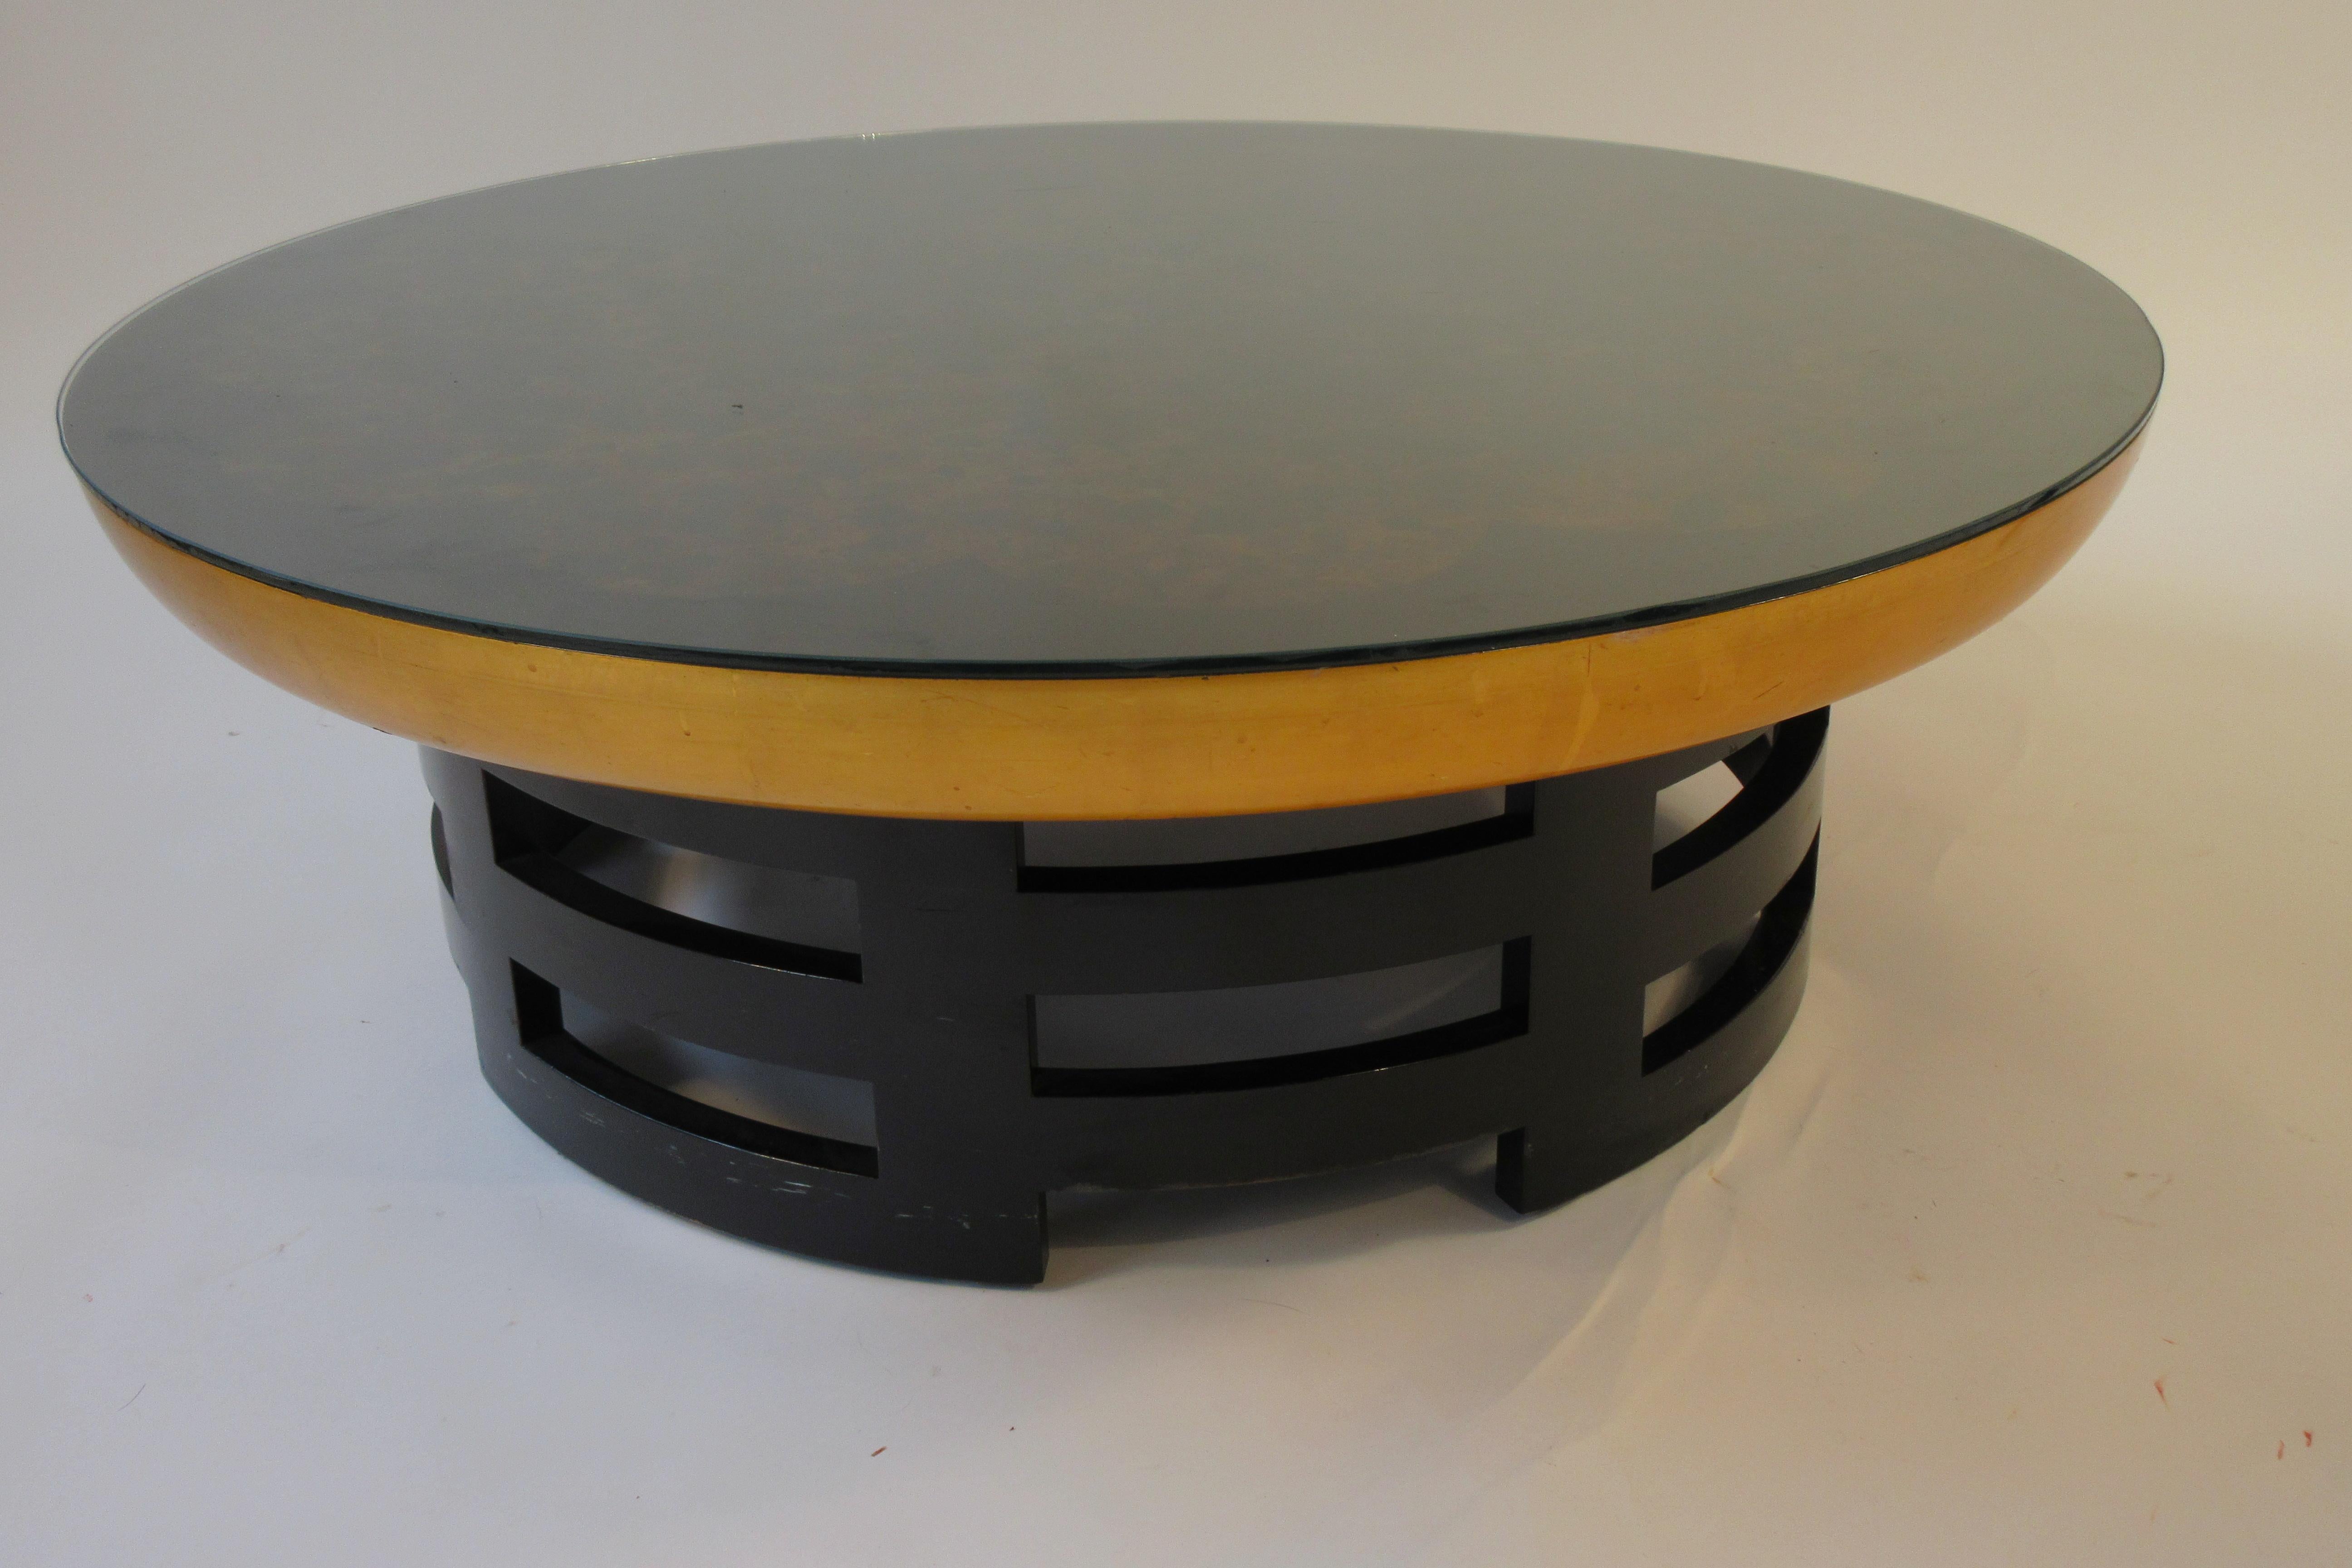 Kittinger Lotus cocktail table by Muller and Barringer with glass top.